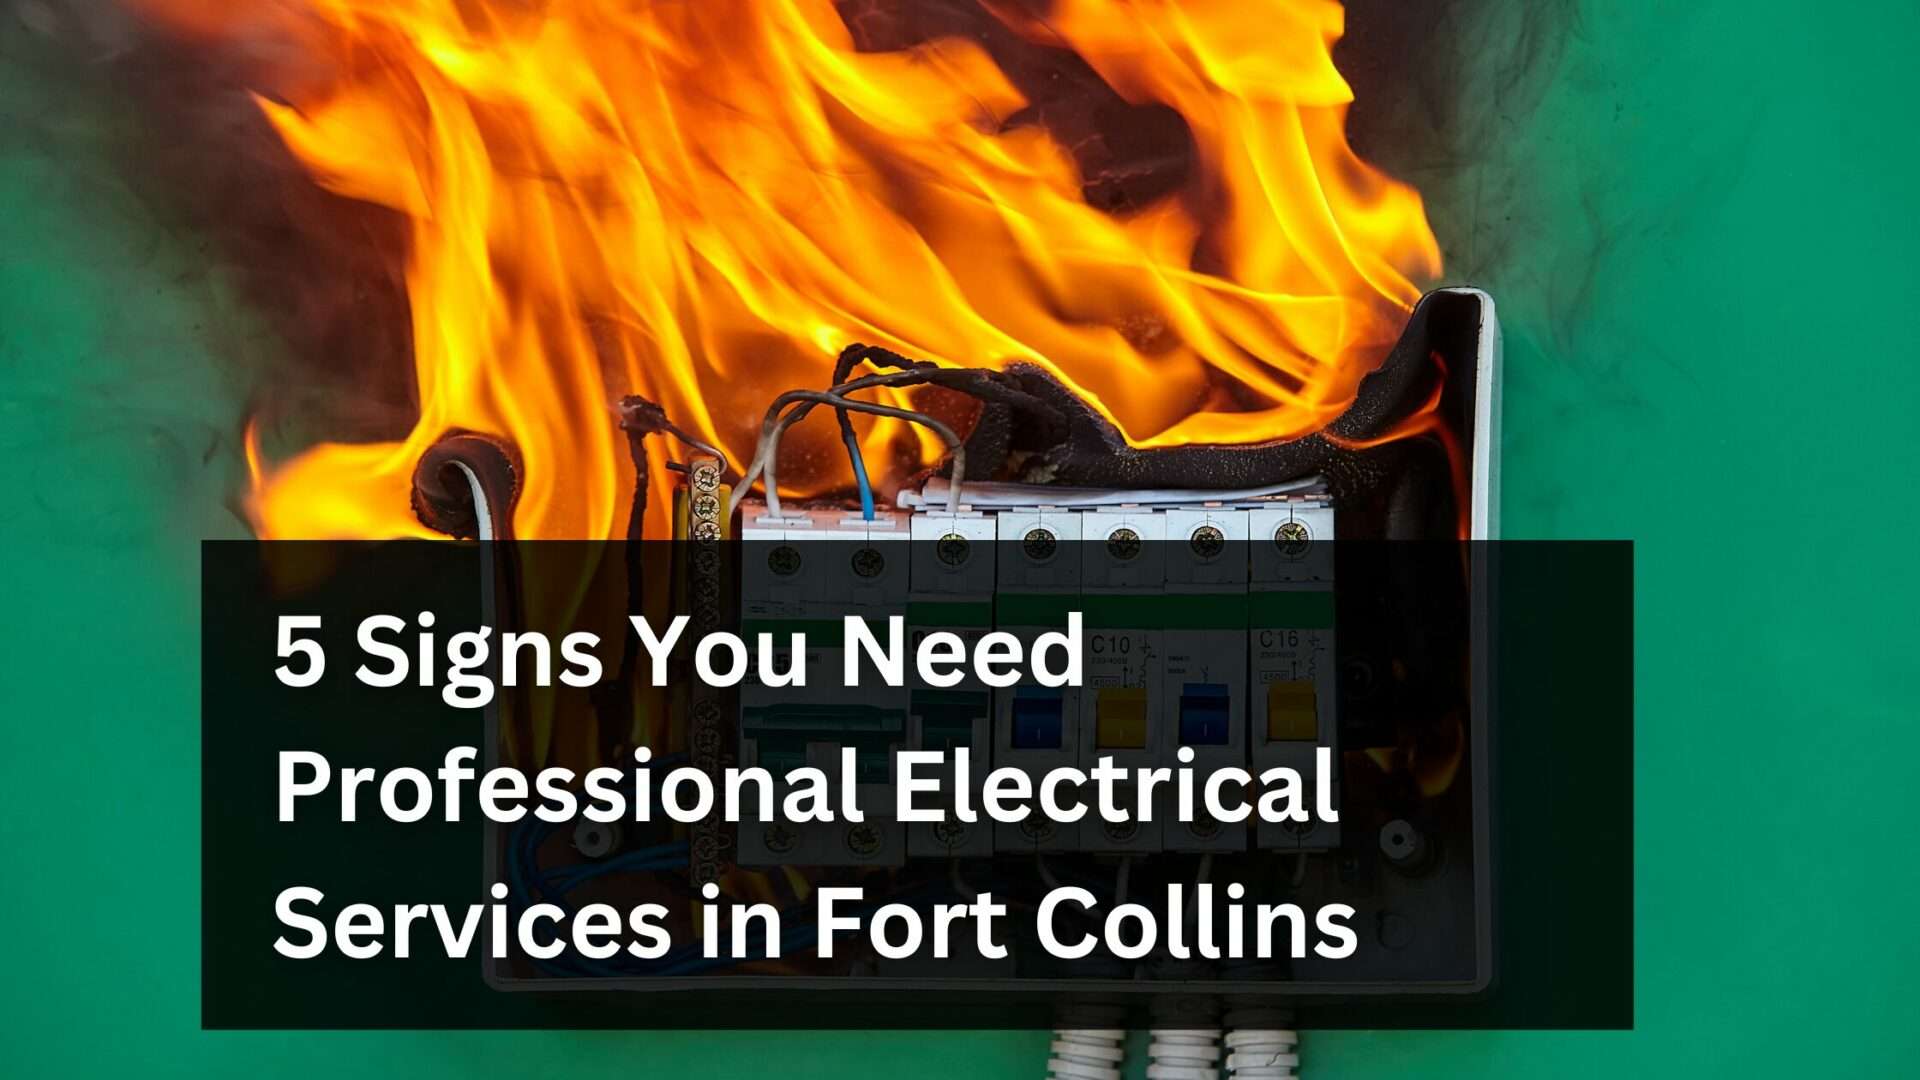 5 Signs You Need Professional Electrical Services in Fort Collins